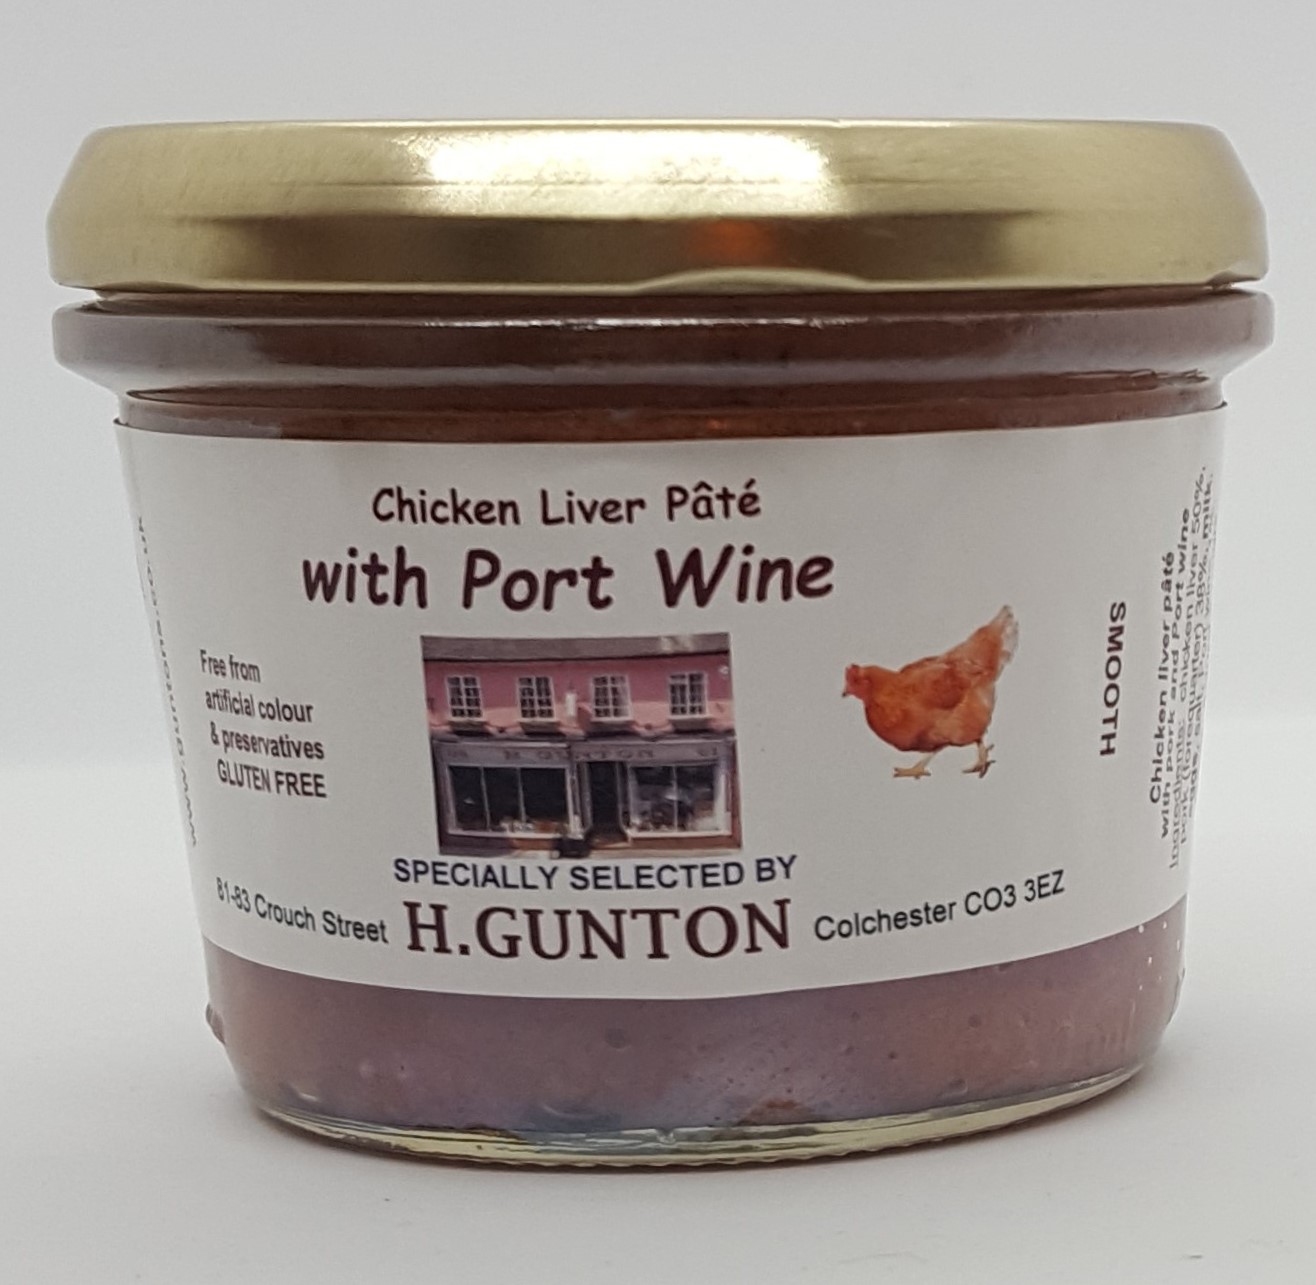 Chicken Liver Pate with Port